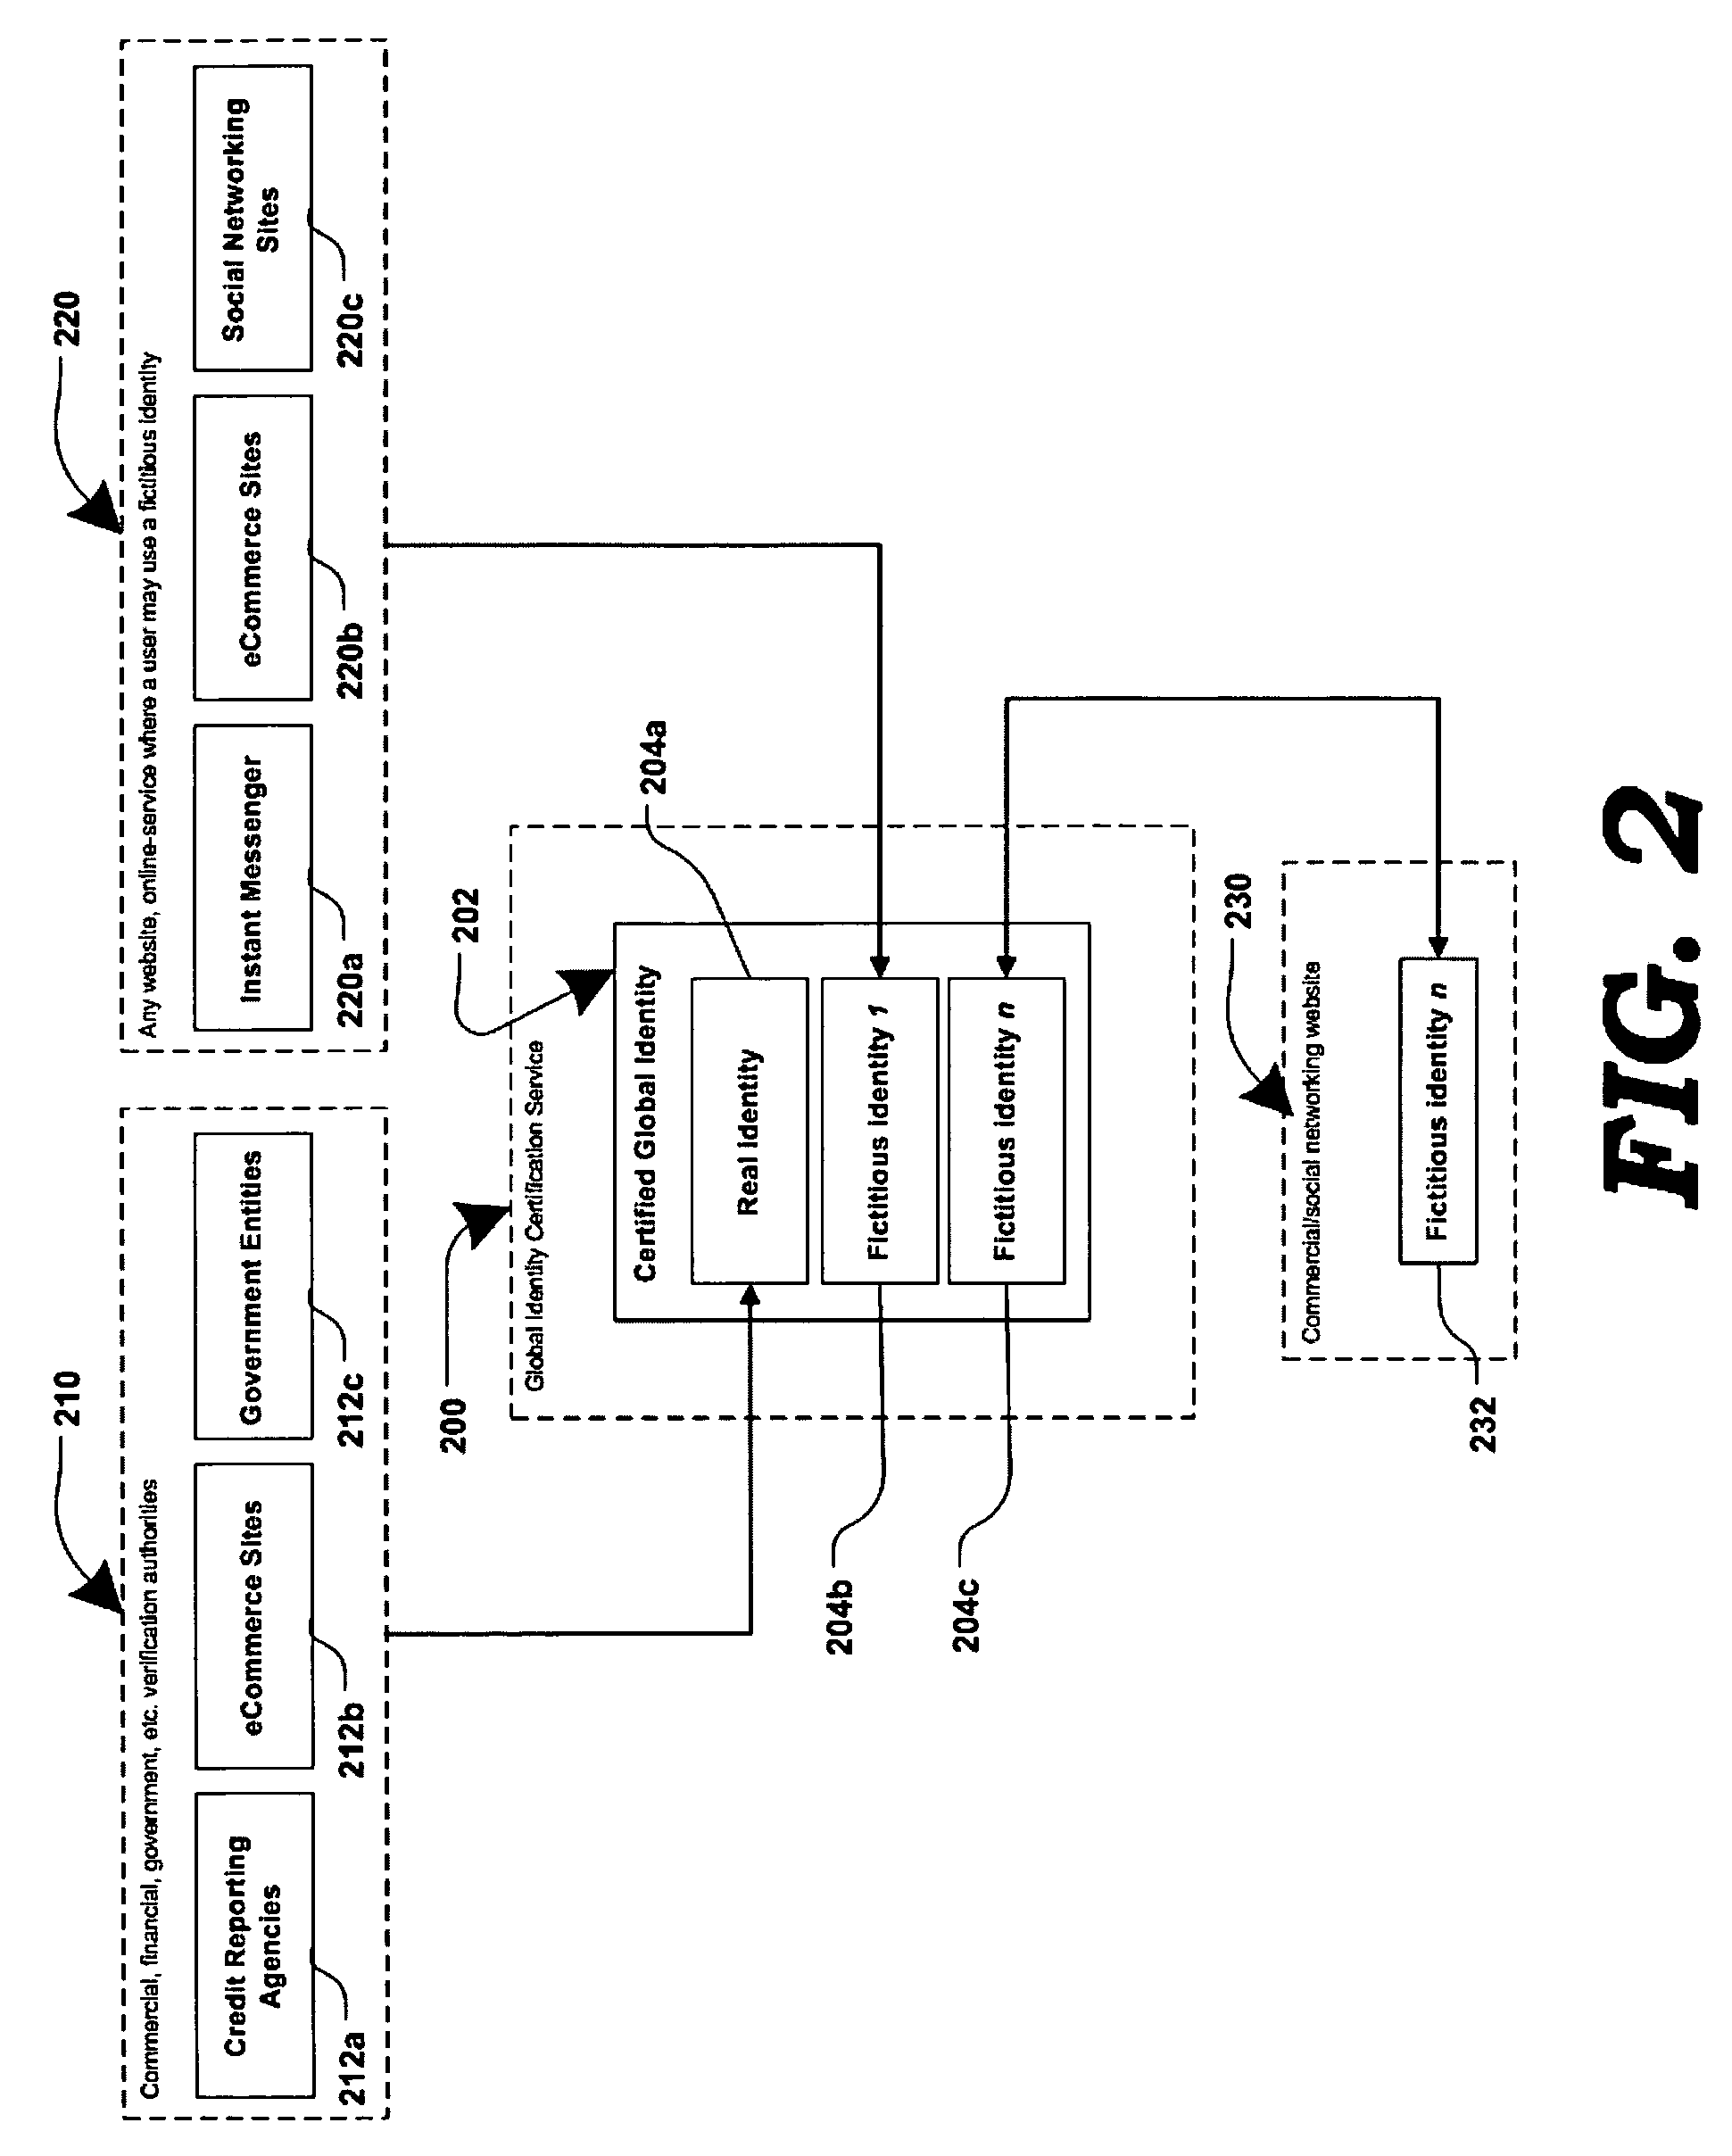 Method and system for securing online identities